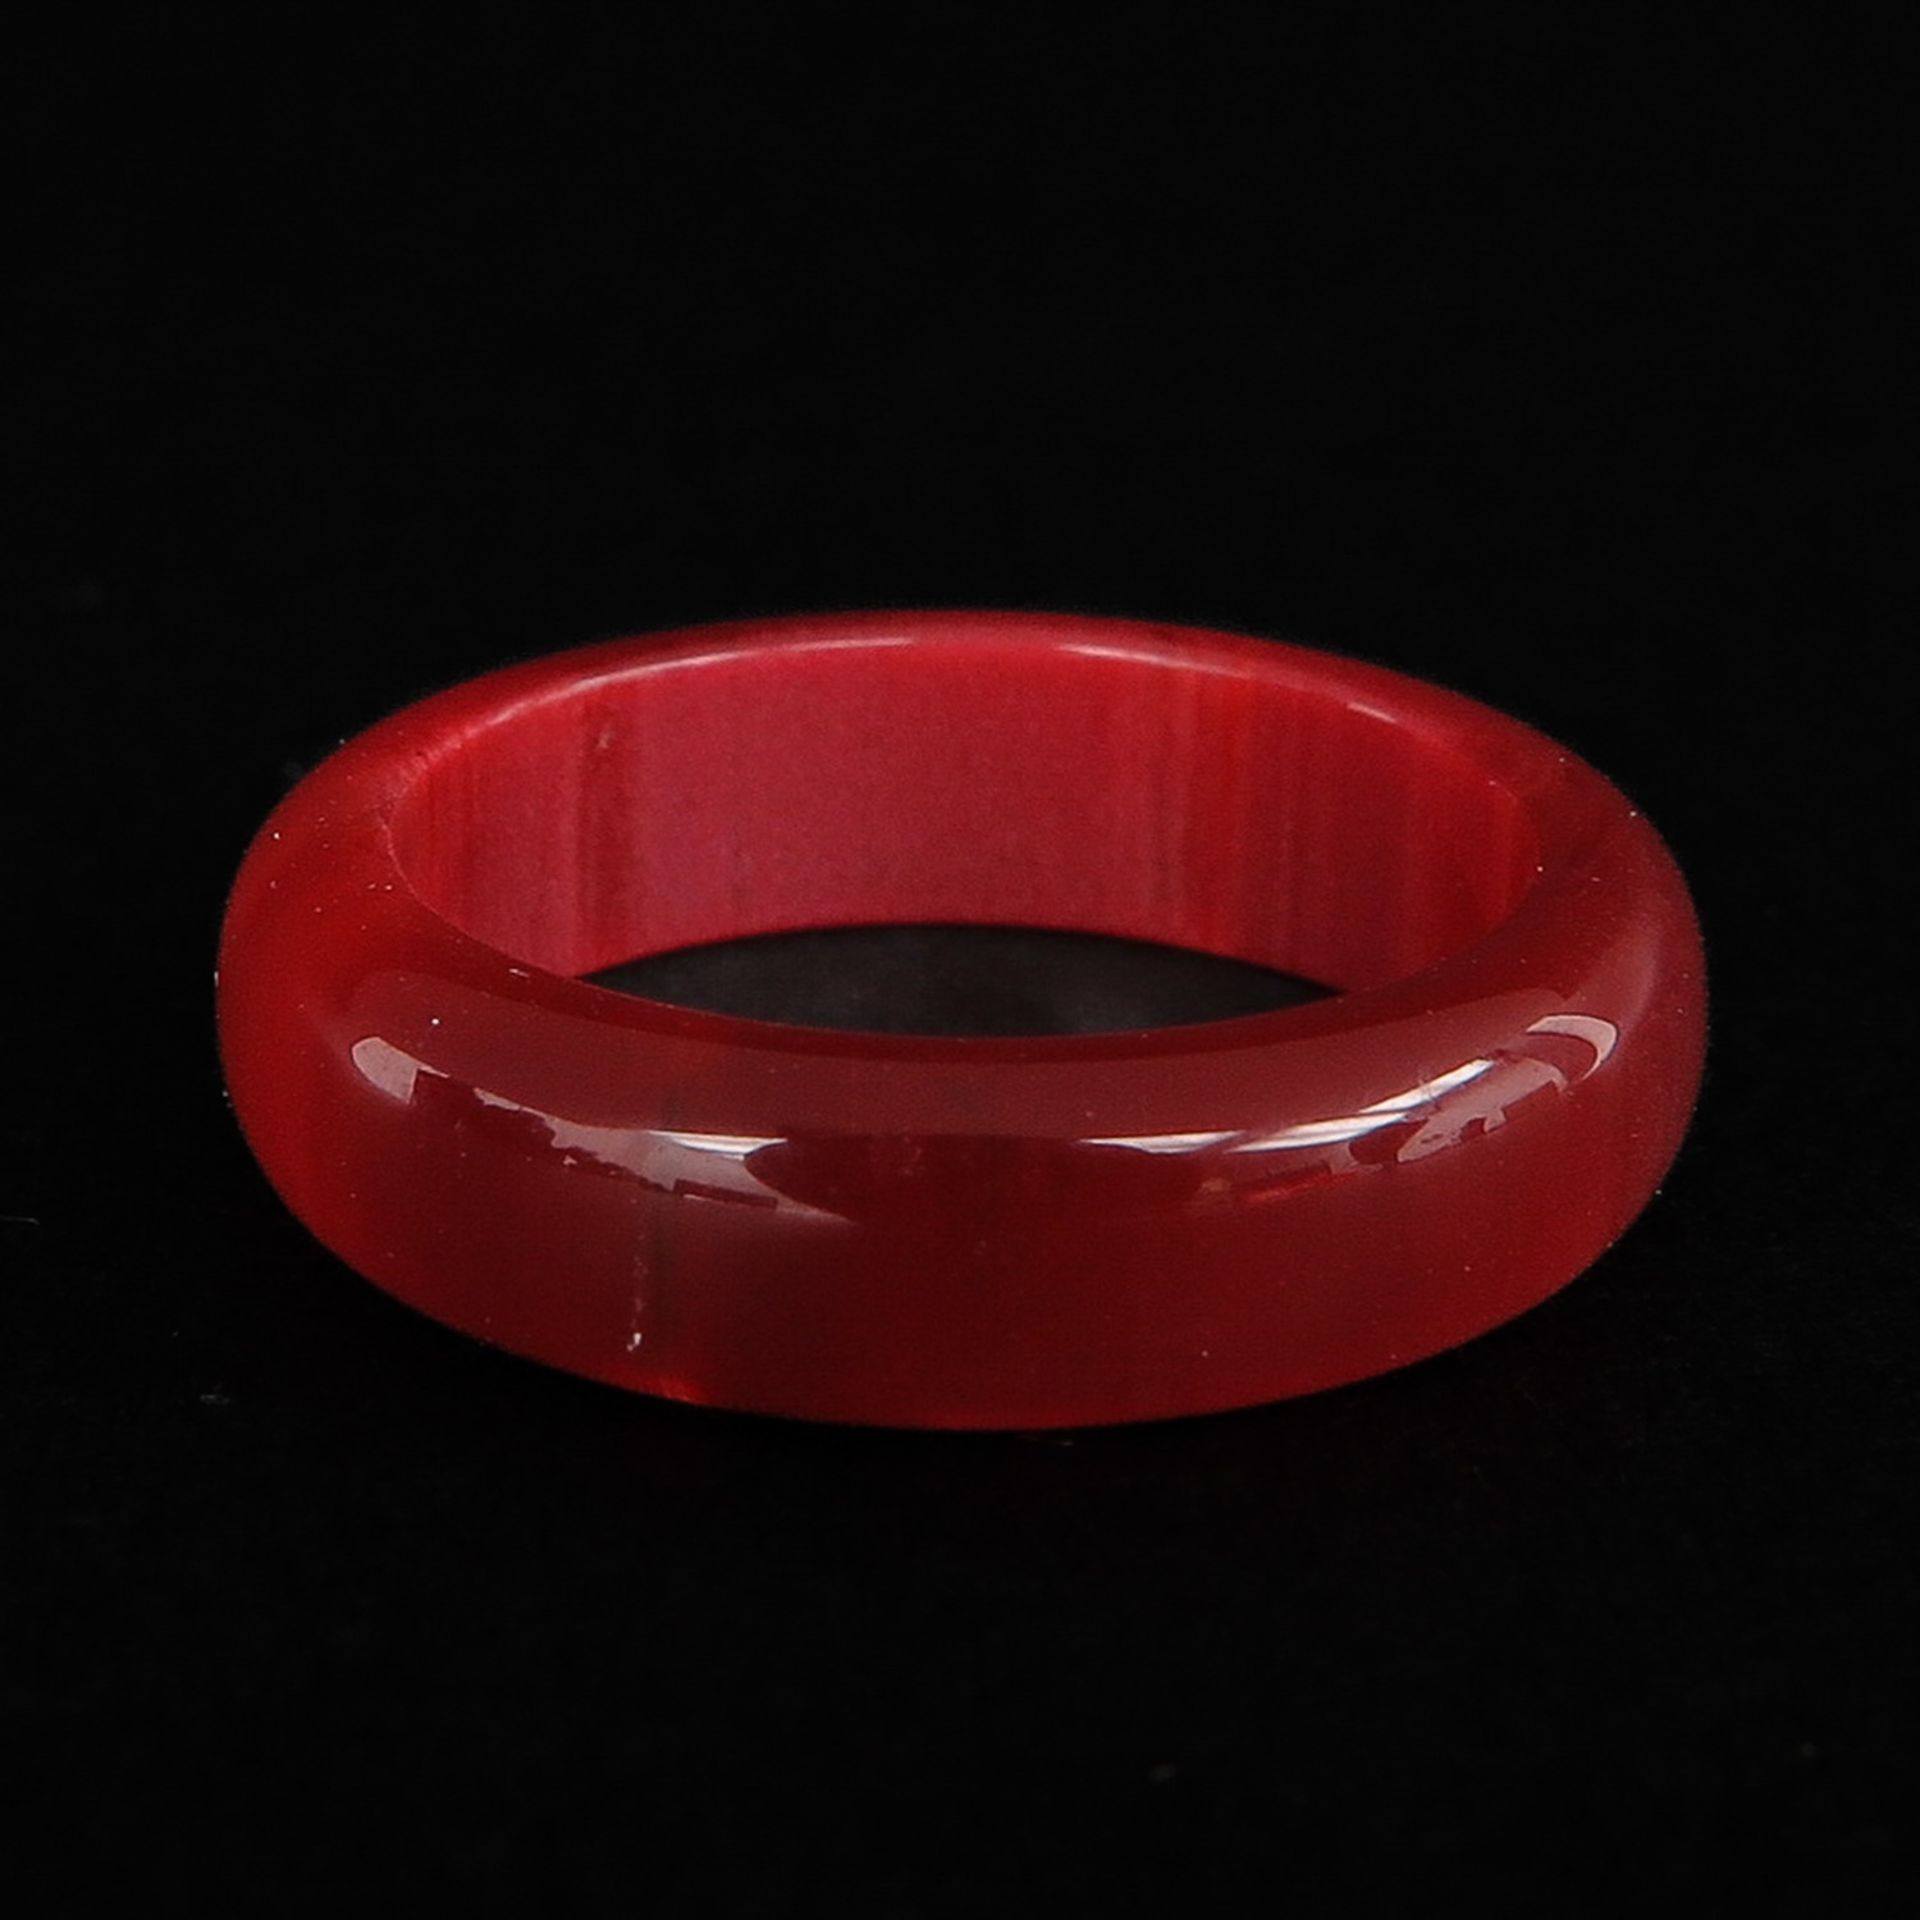 An 18KG Ring with Interchangeable Bands - Image 4 of 7